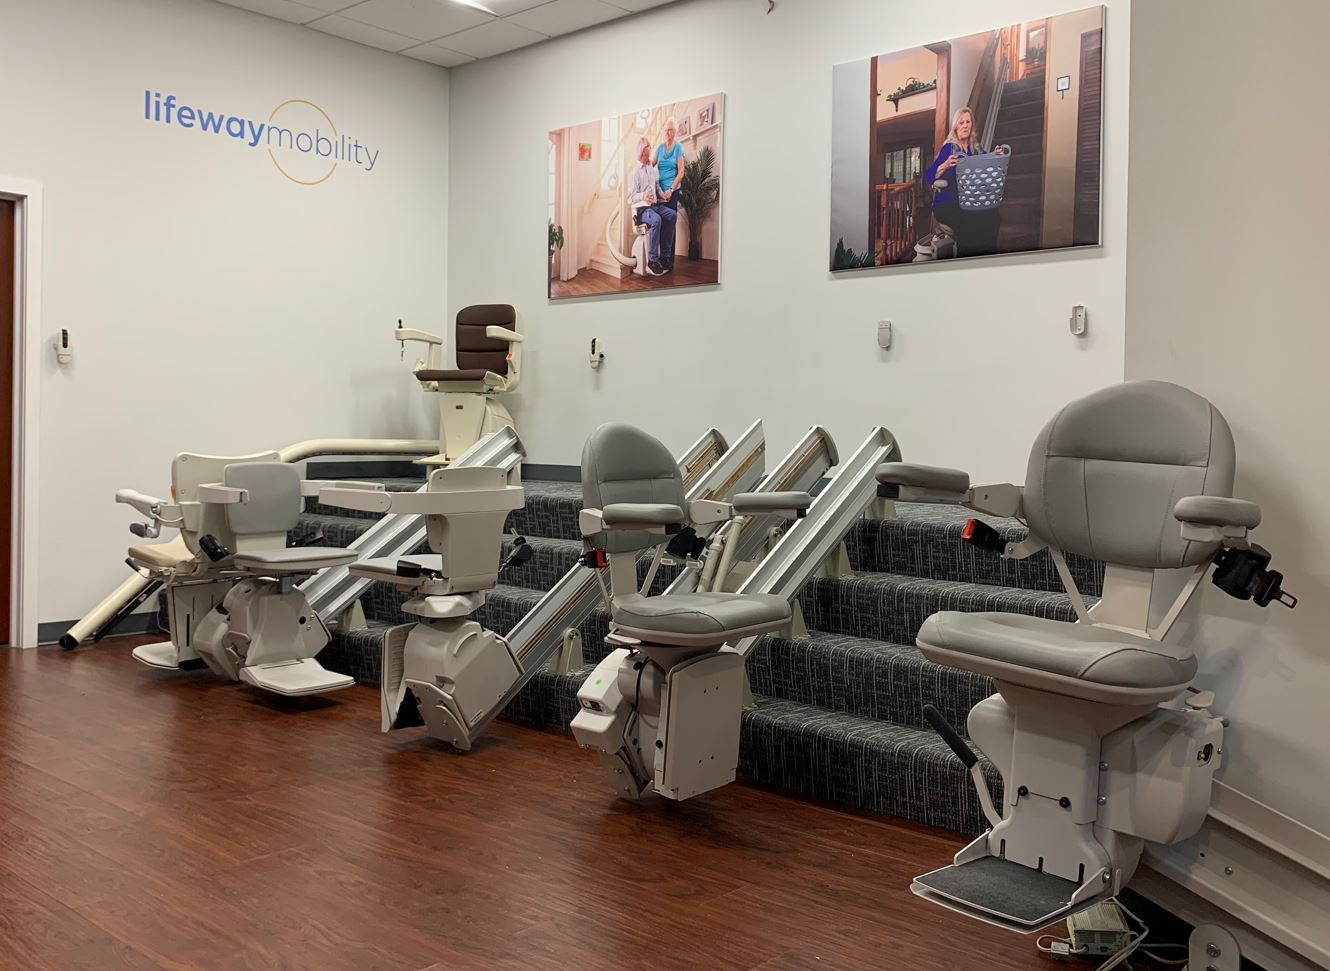 Stairlifts in Lifeway Mobility Chicago showroom in Arlington Heights, IL